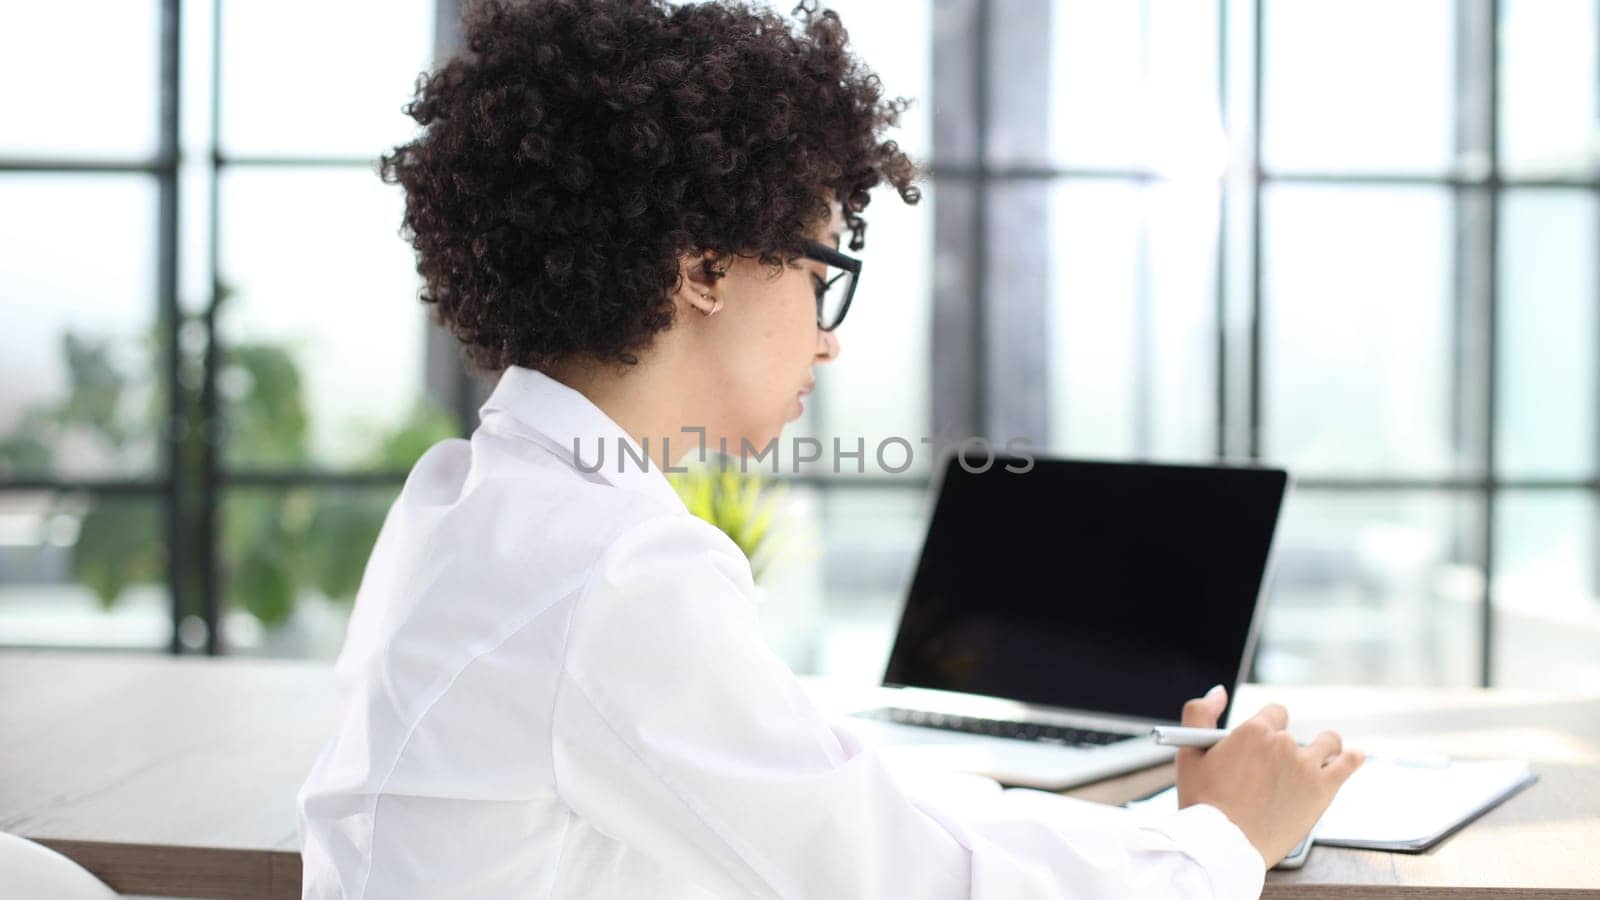 Image of young beautiful joyful woman smiling while working with laptop in office